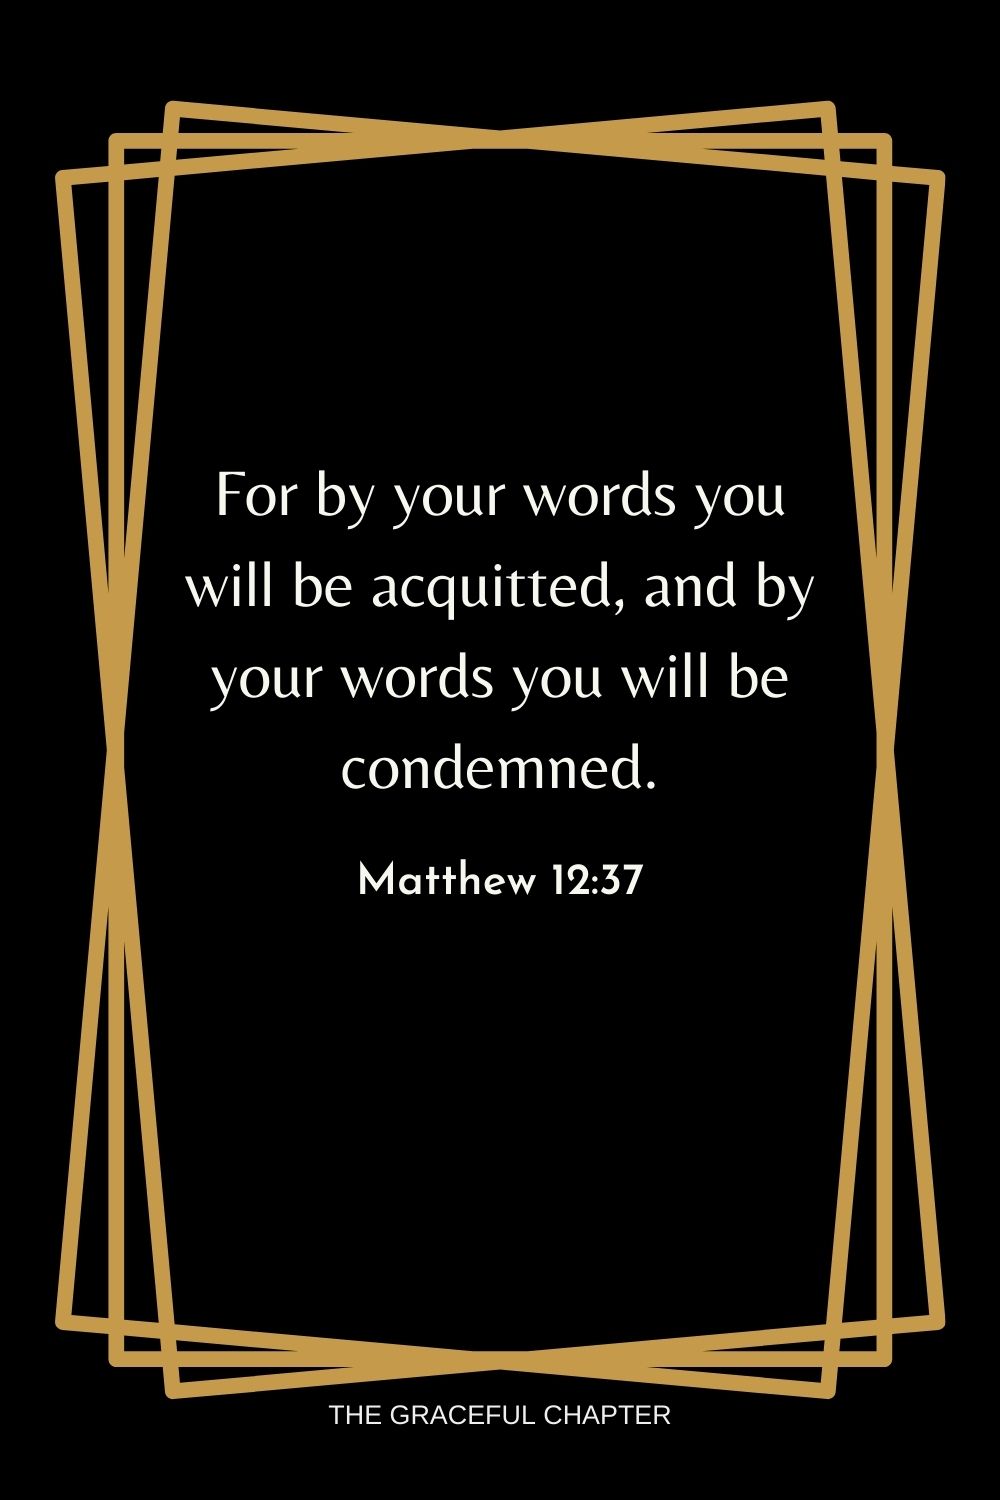 For by your words you will be acquitted, and by your words you will be condemned. Matthew 12:37